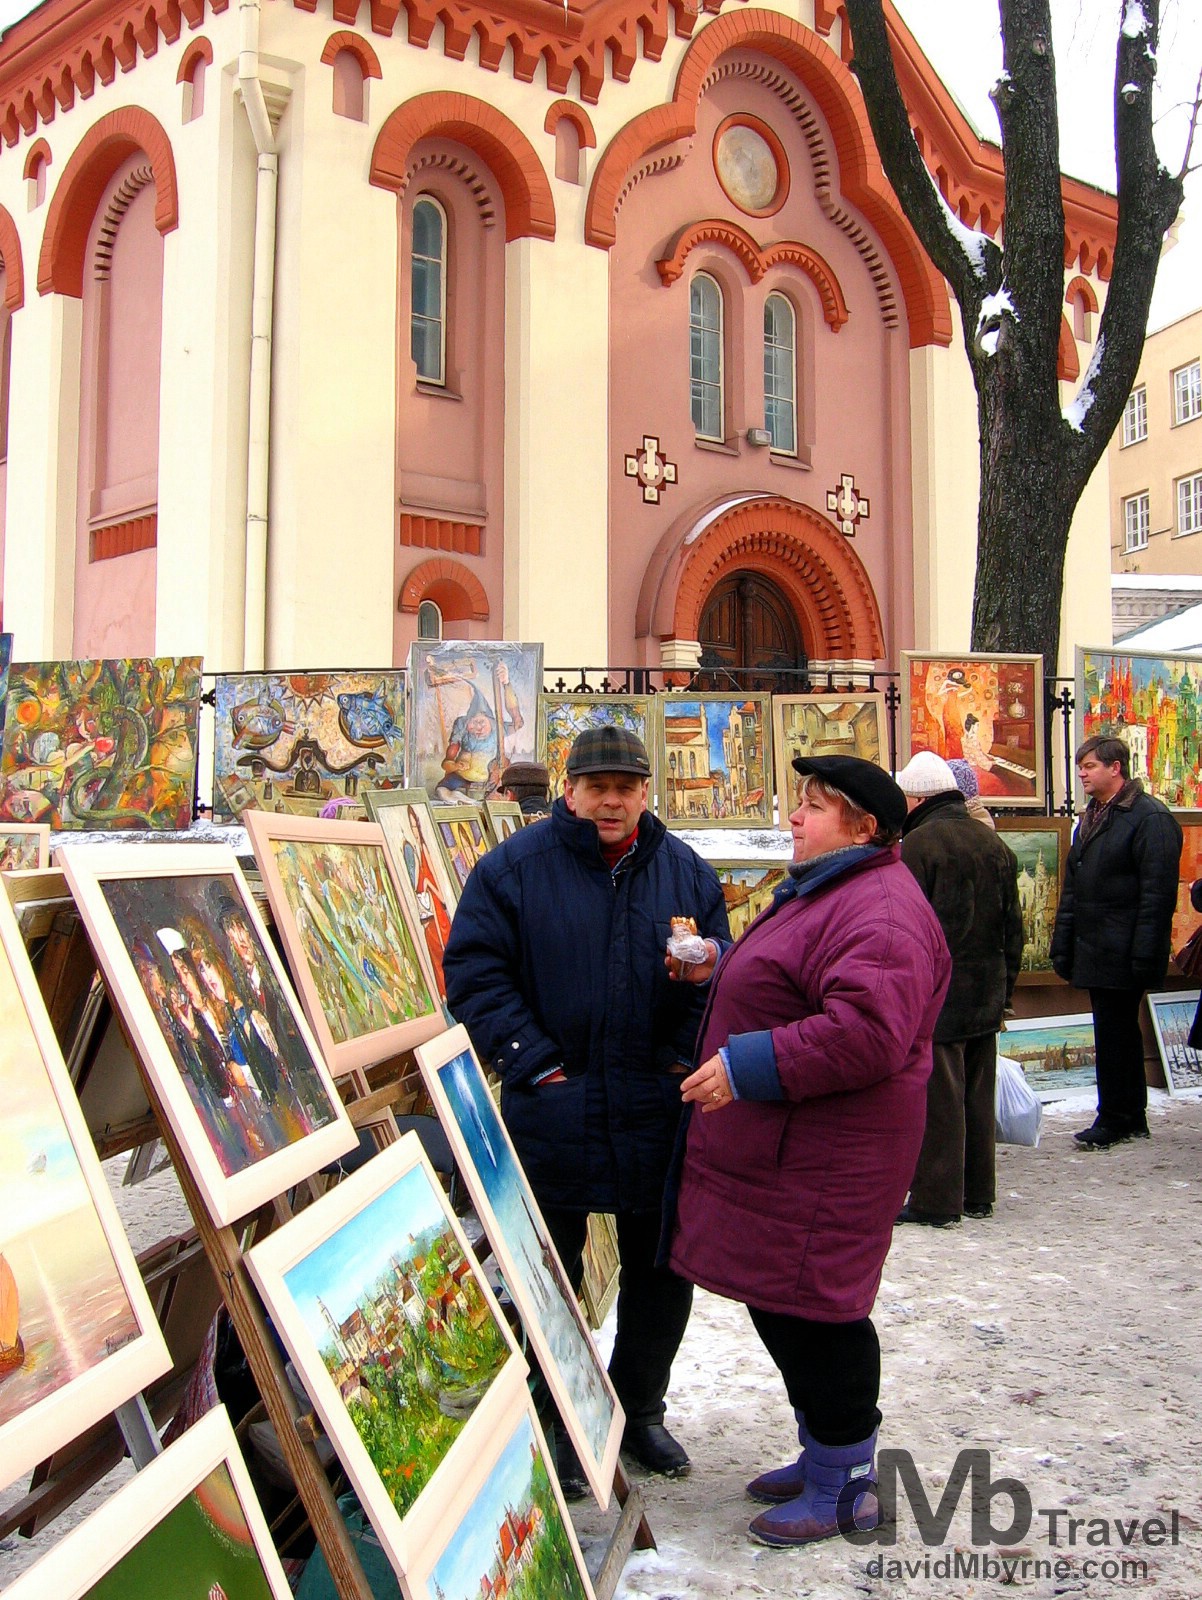 Art for sale on the streets of Vilnius, Lithuania. March 4, 2006.